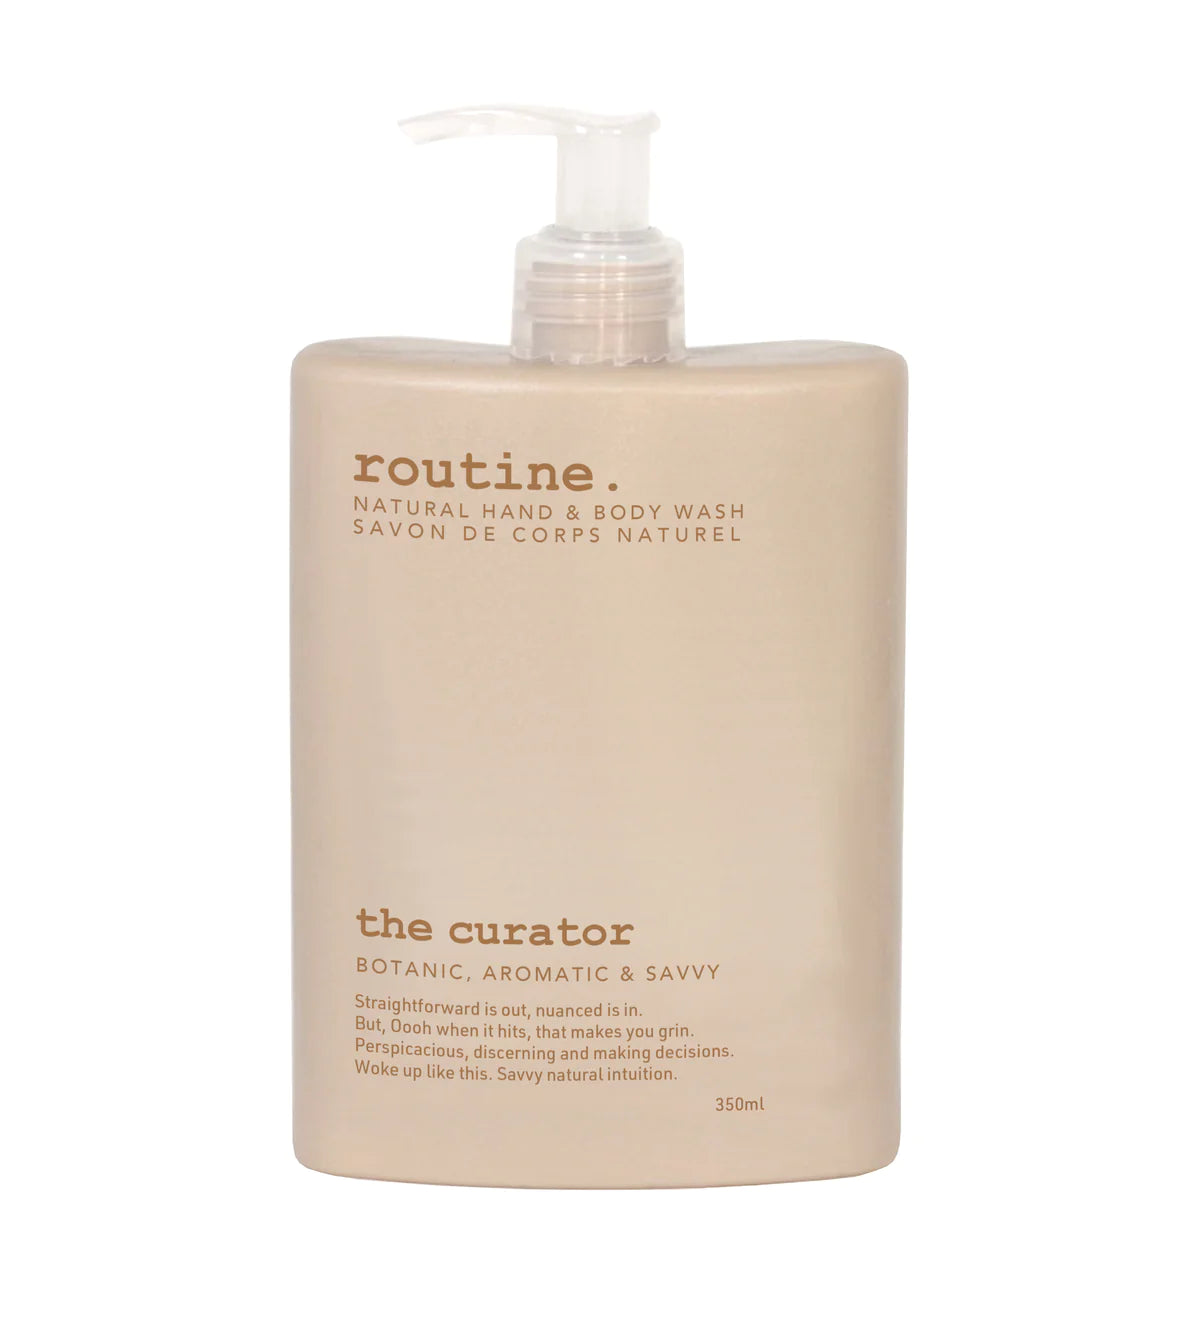 The Curator Natural Hand & Body Wash